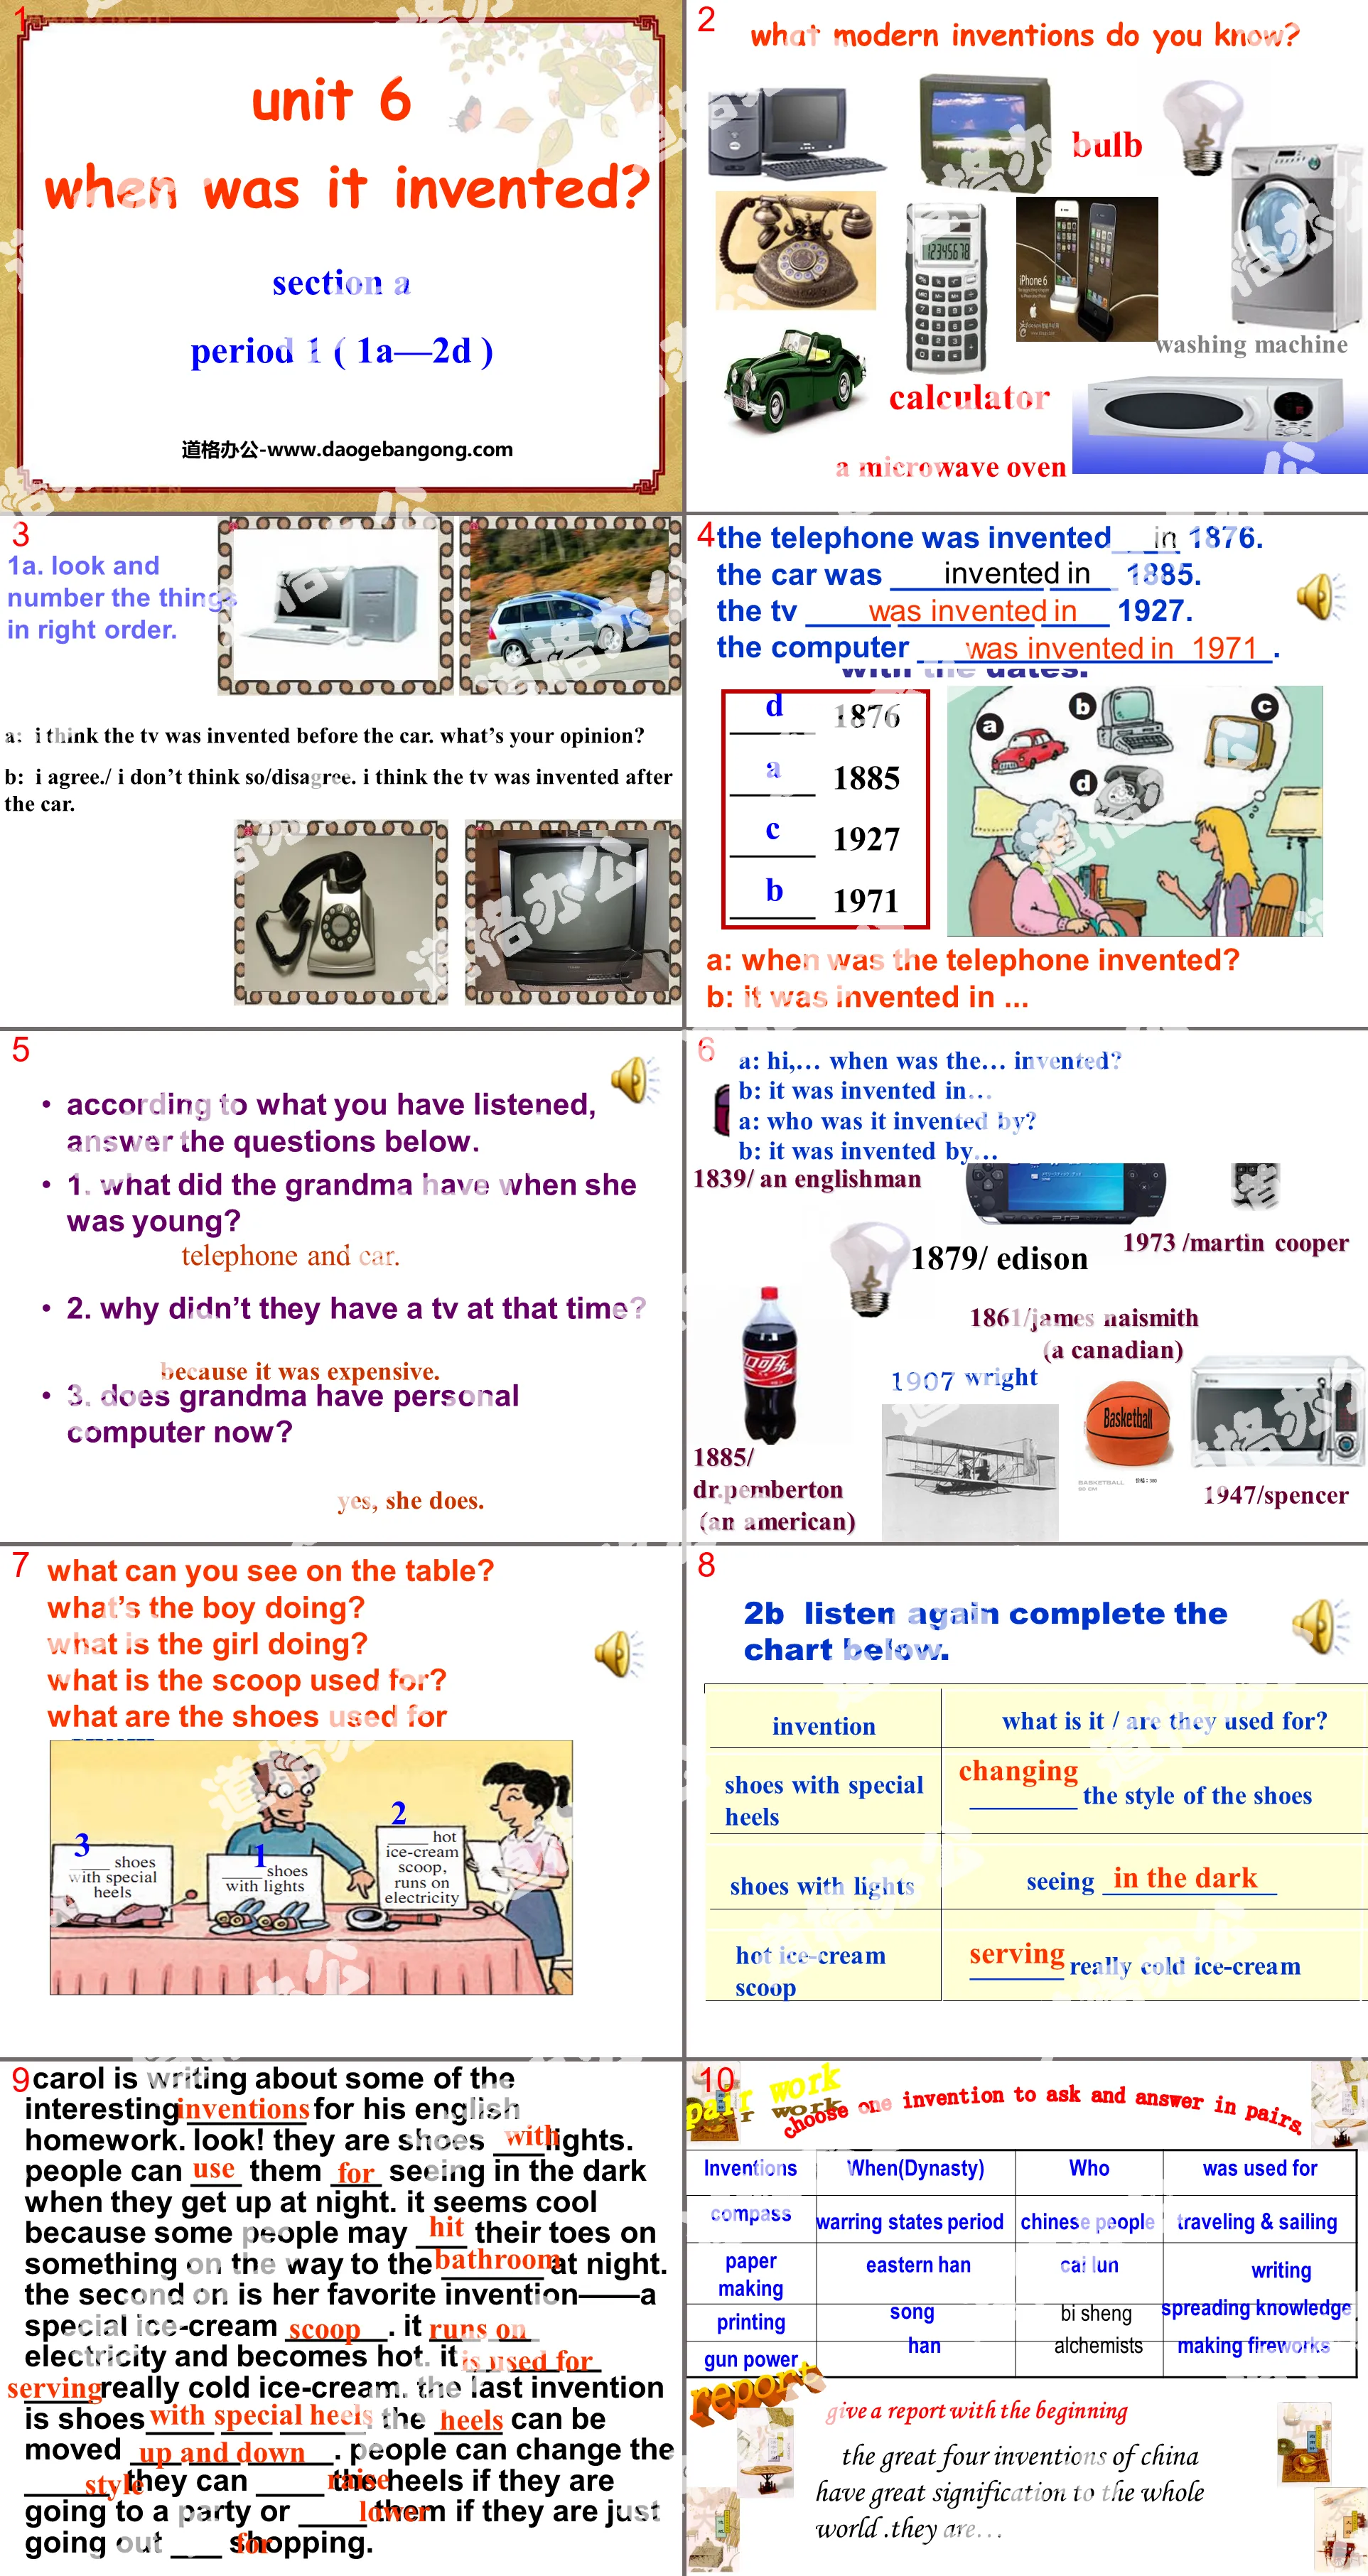 "When was it invented?" PPT courseware 13